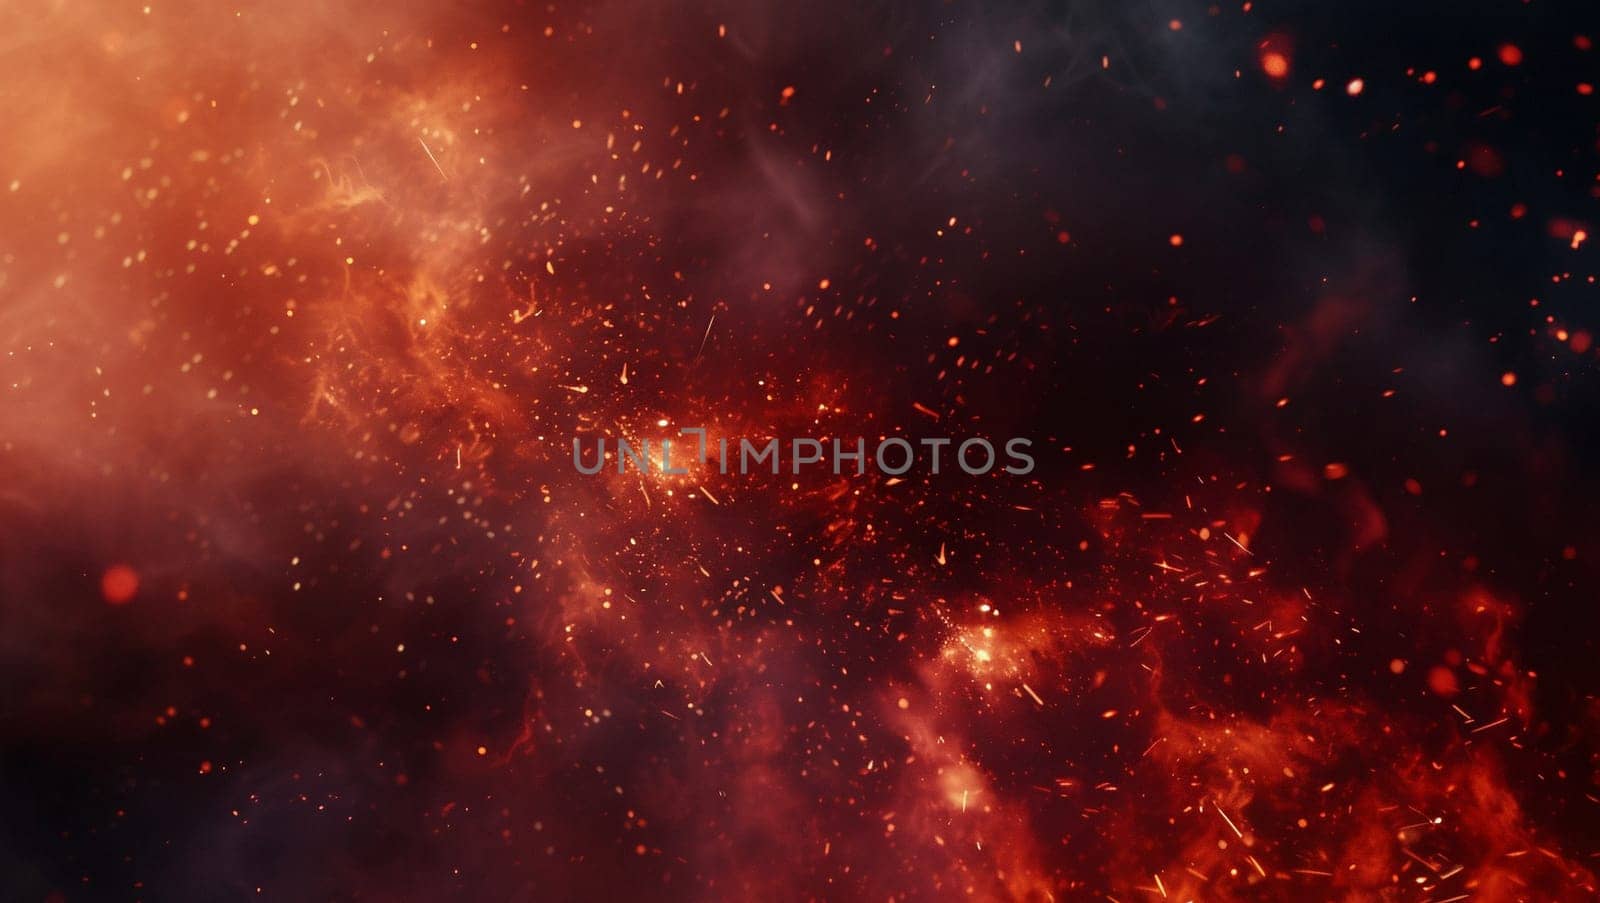 Fire background with flames. Hot image of a blazing fire. by Sneznyj